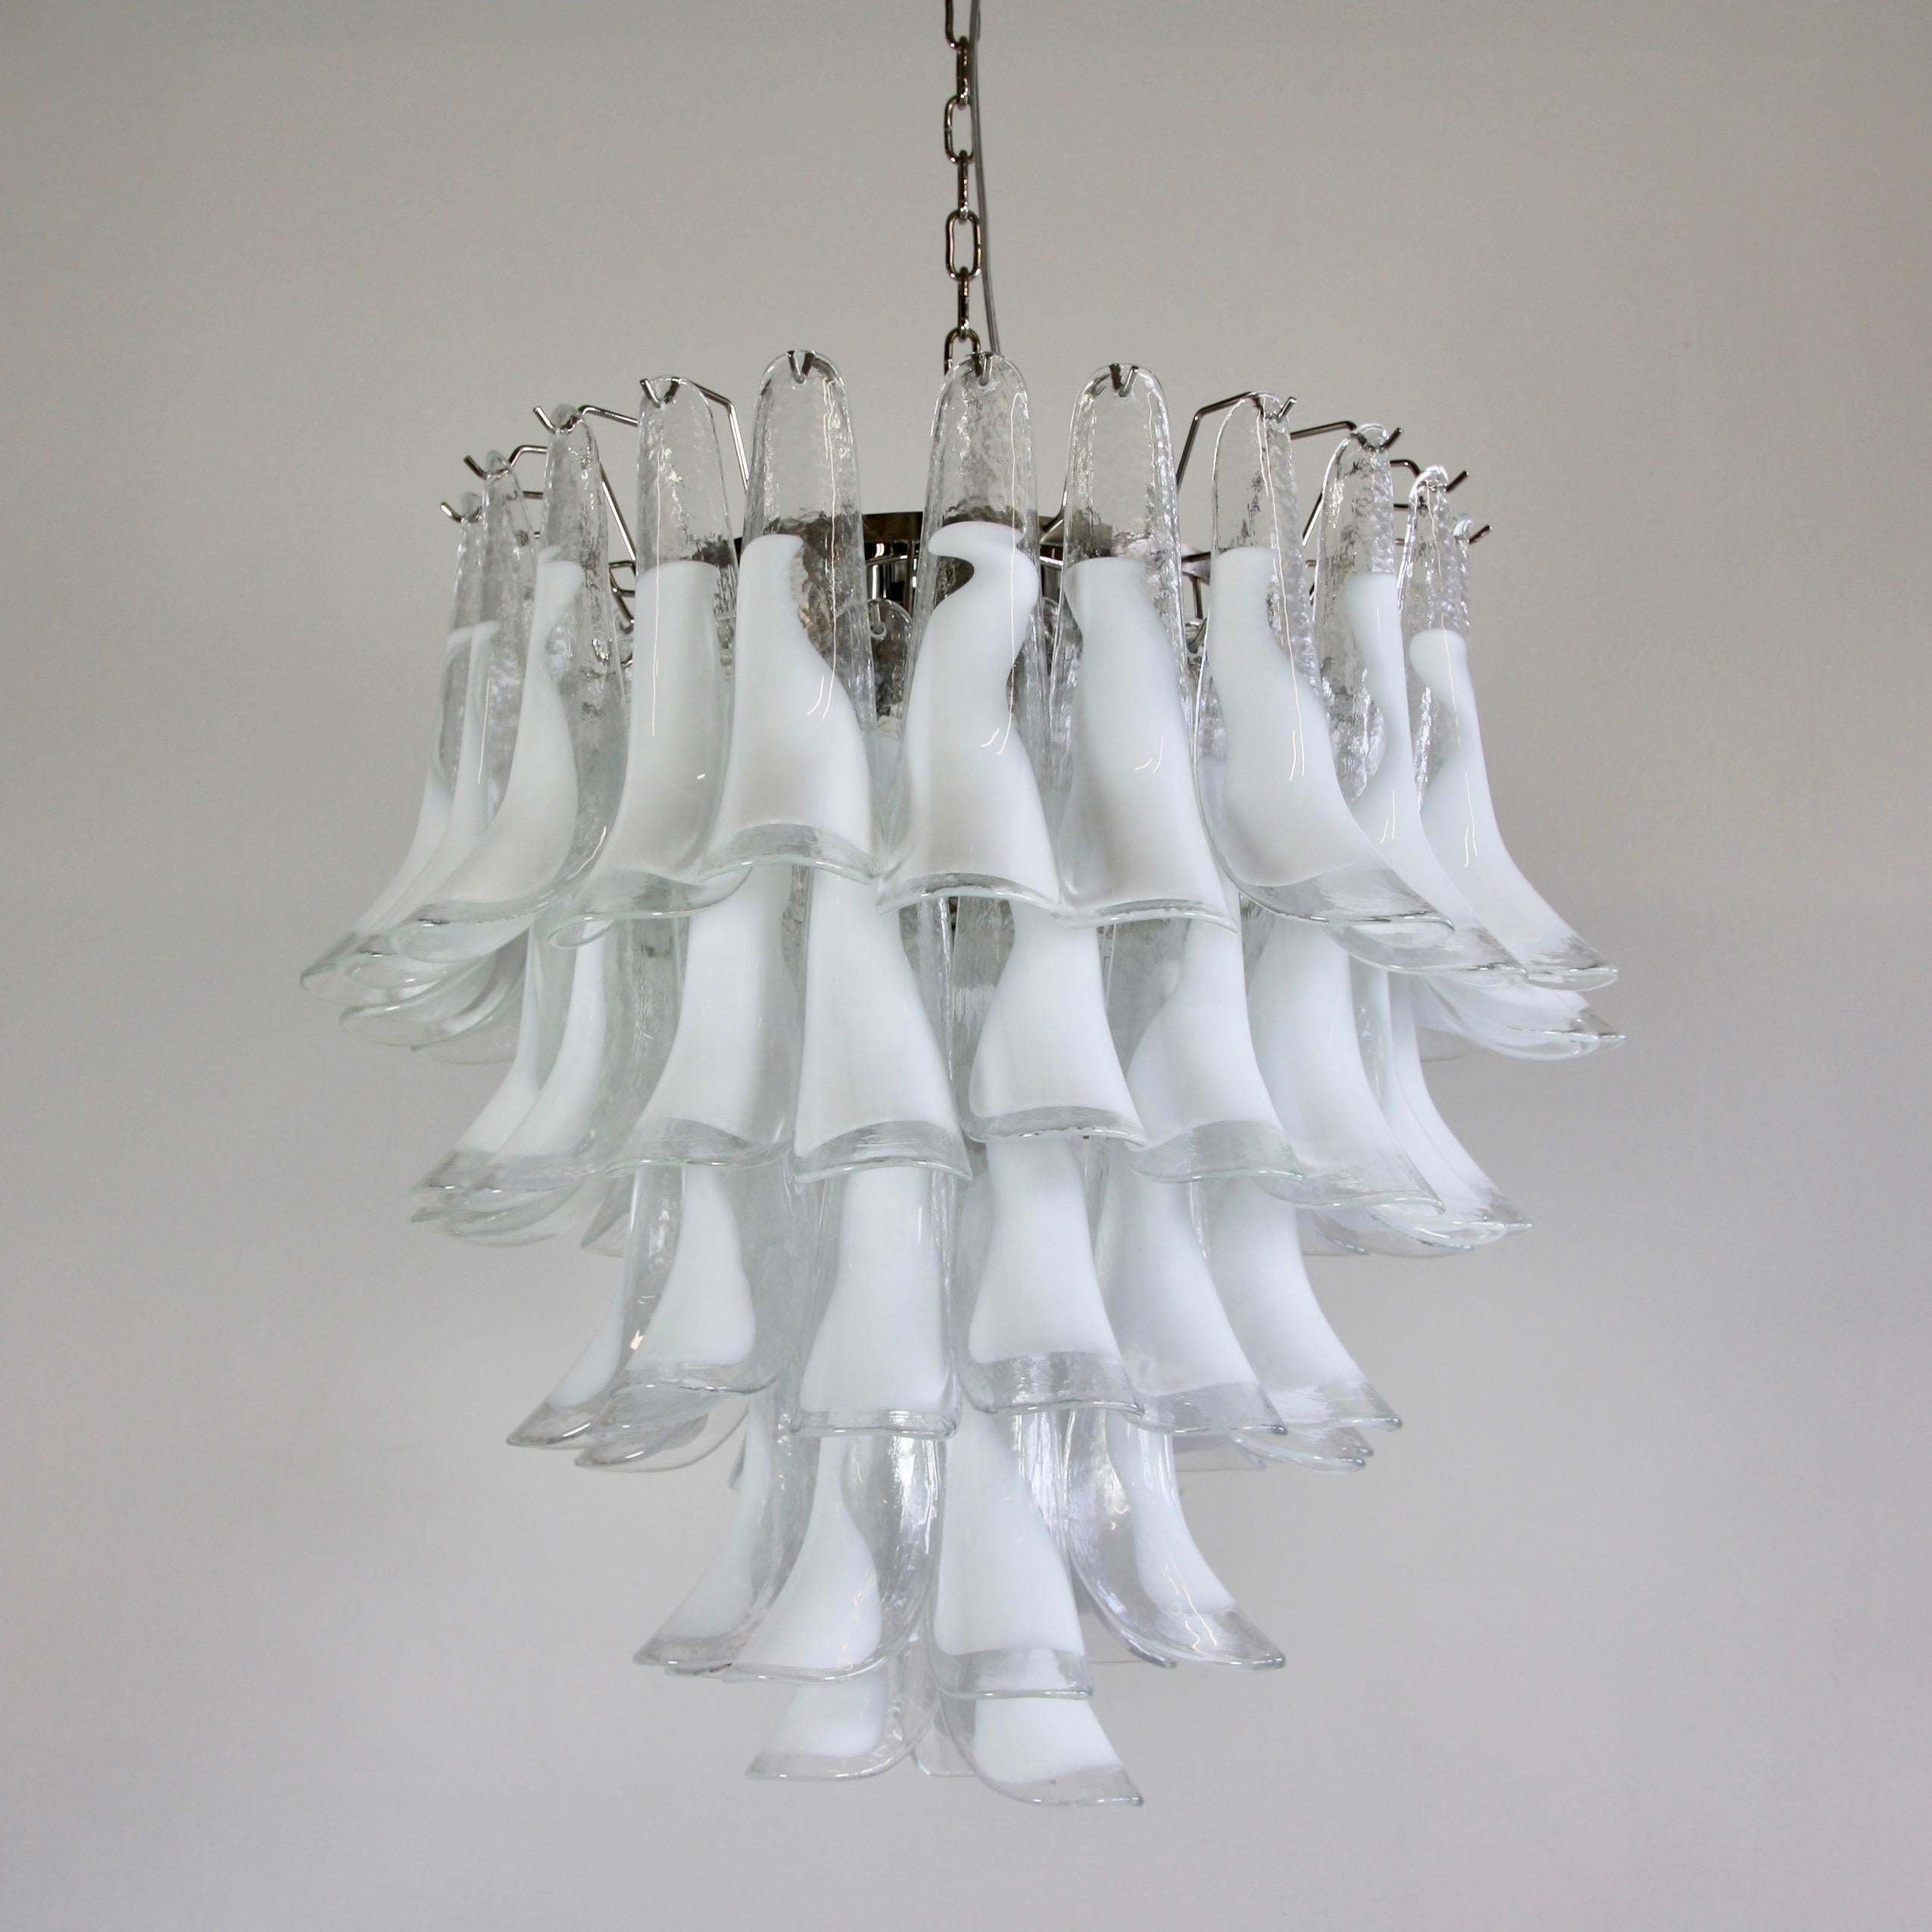 Late 20th Century Murano Glass Saddle Form Chandelier 'White'